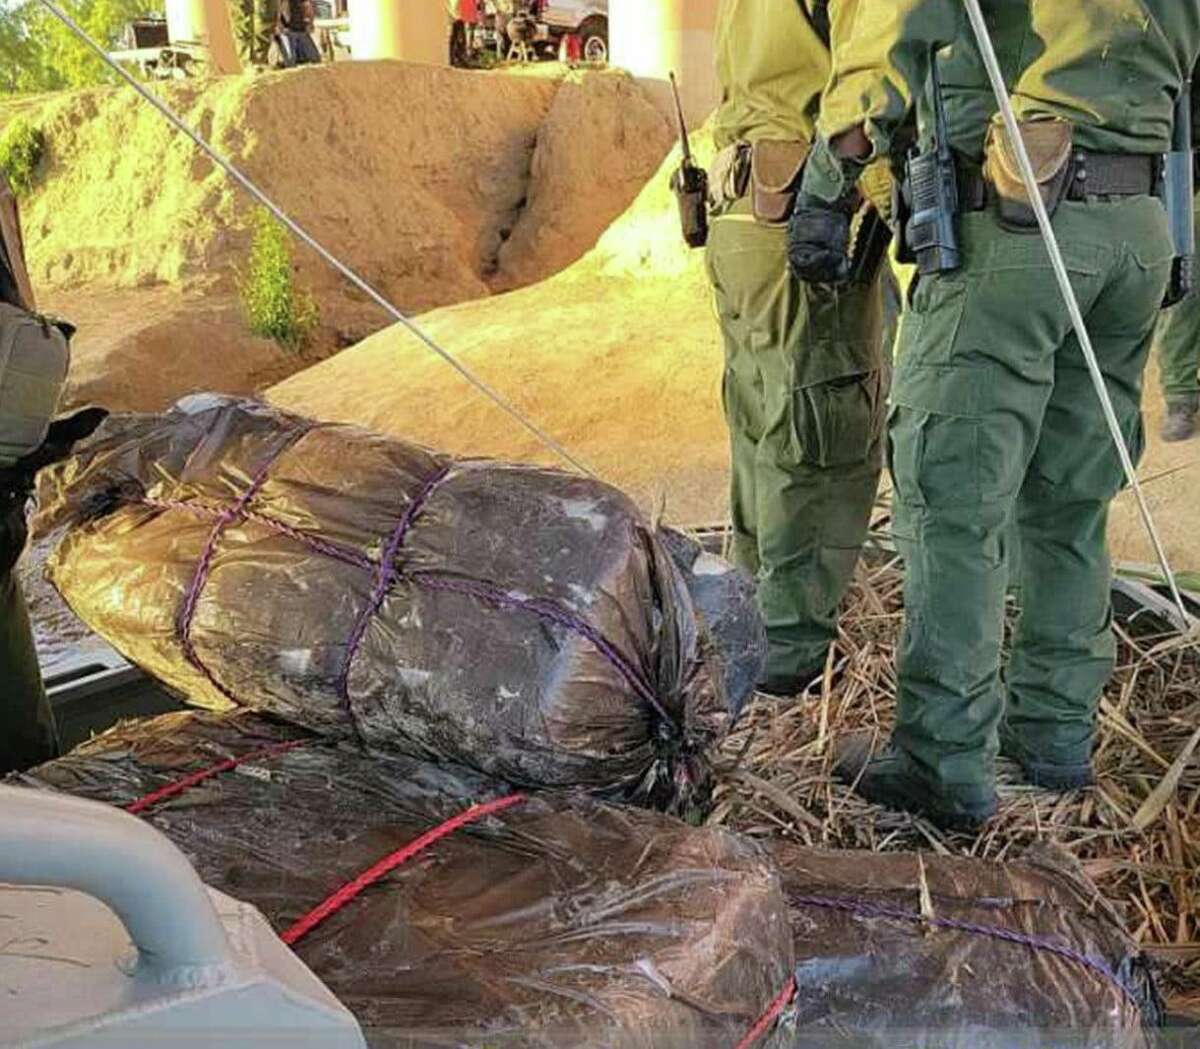 U.S. Border Patrol agents halted a marijuana smuggling attempt near the World Trade Bridge. The contraband weighed 360 pounds and had an estimated street value of $216,000.